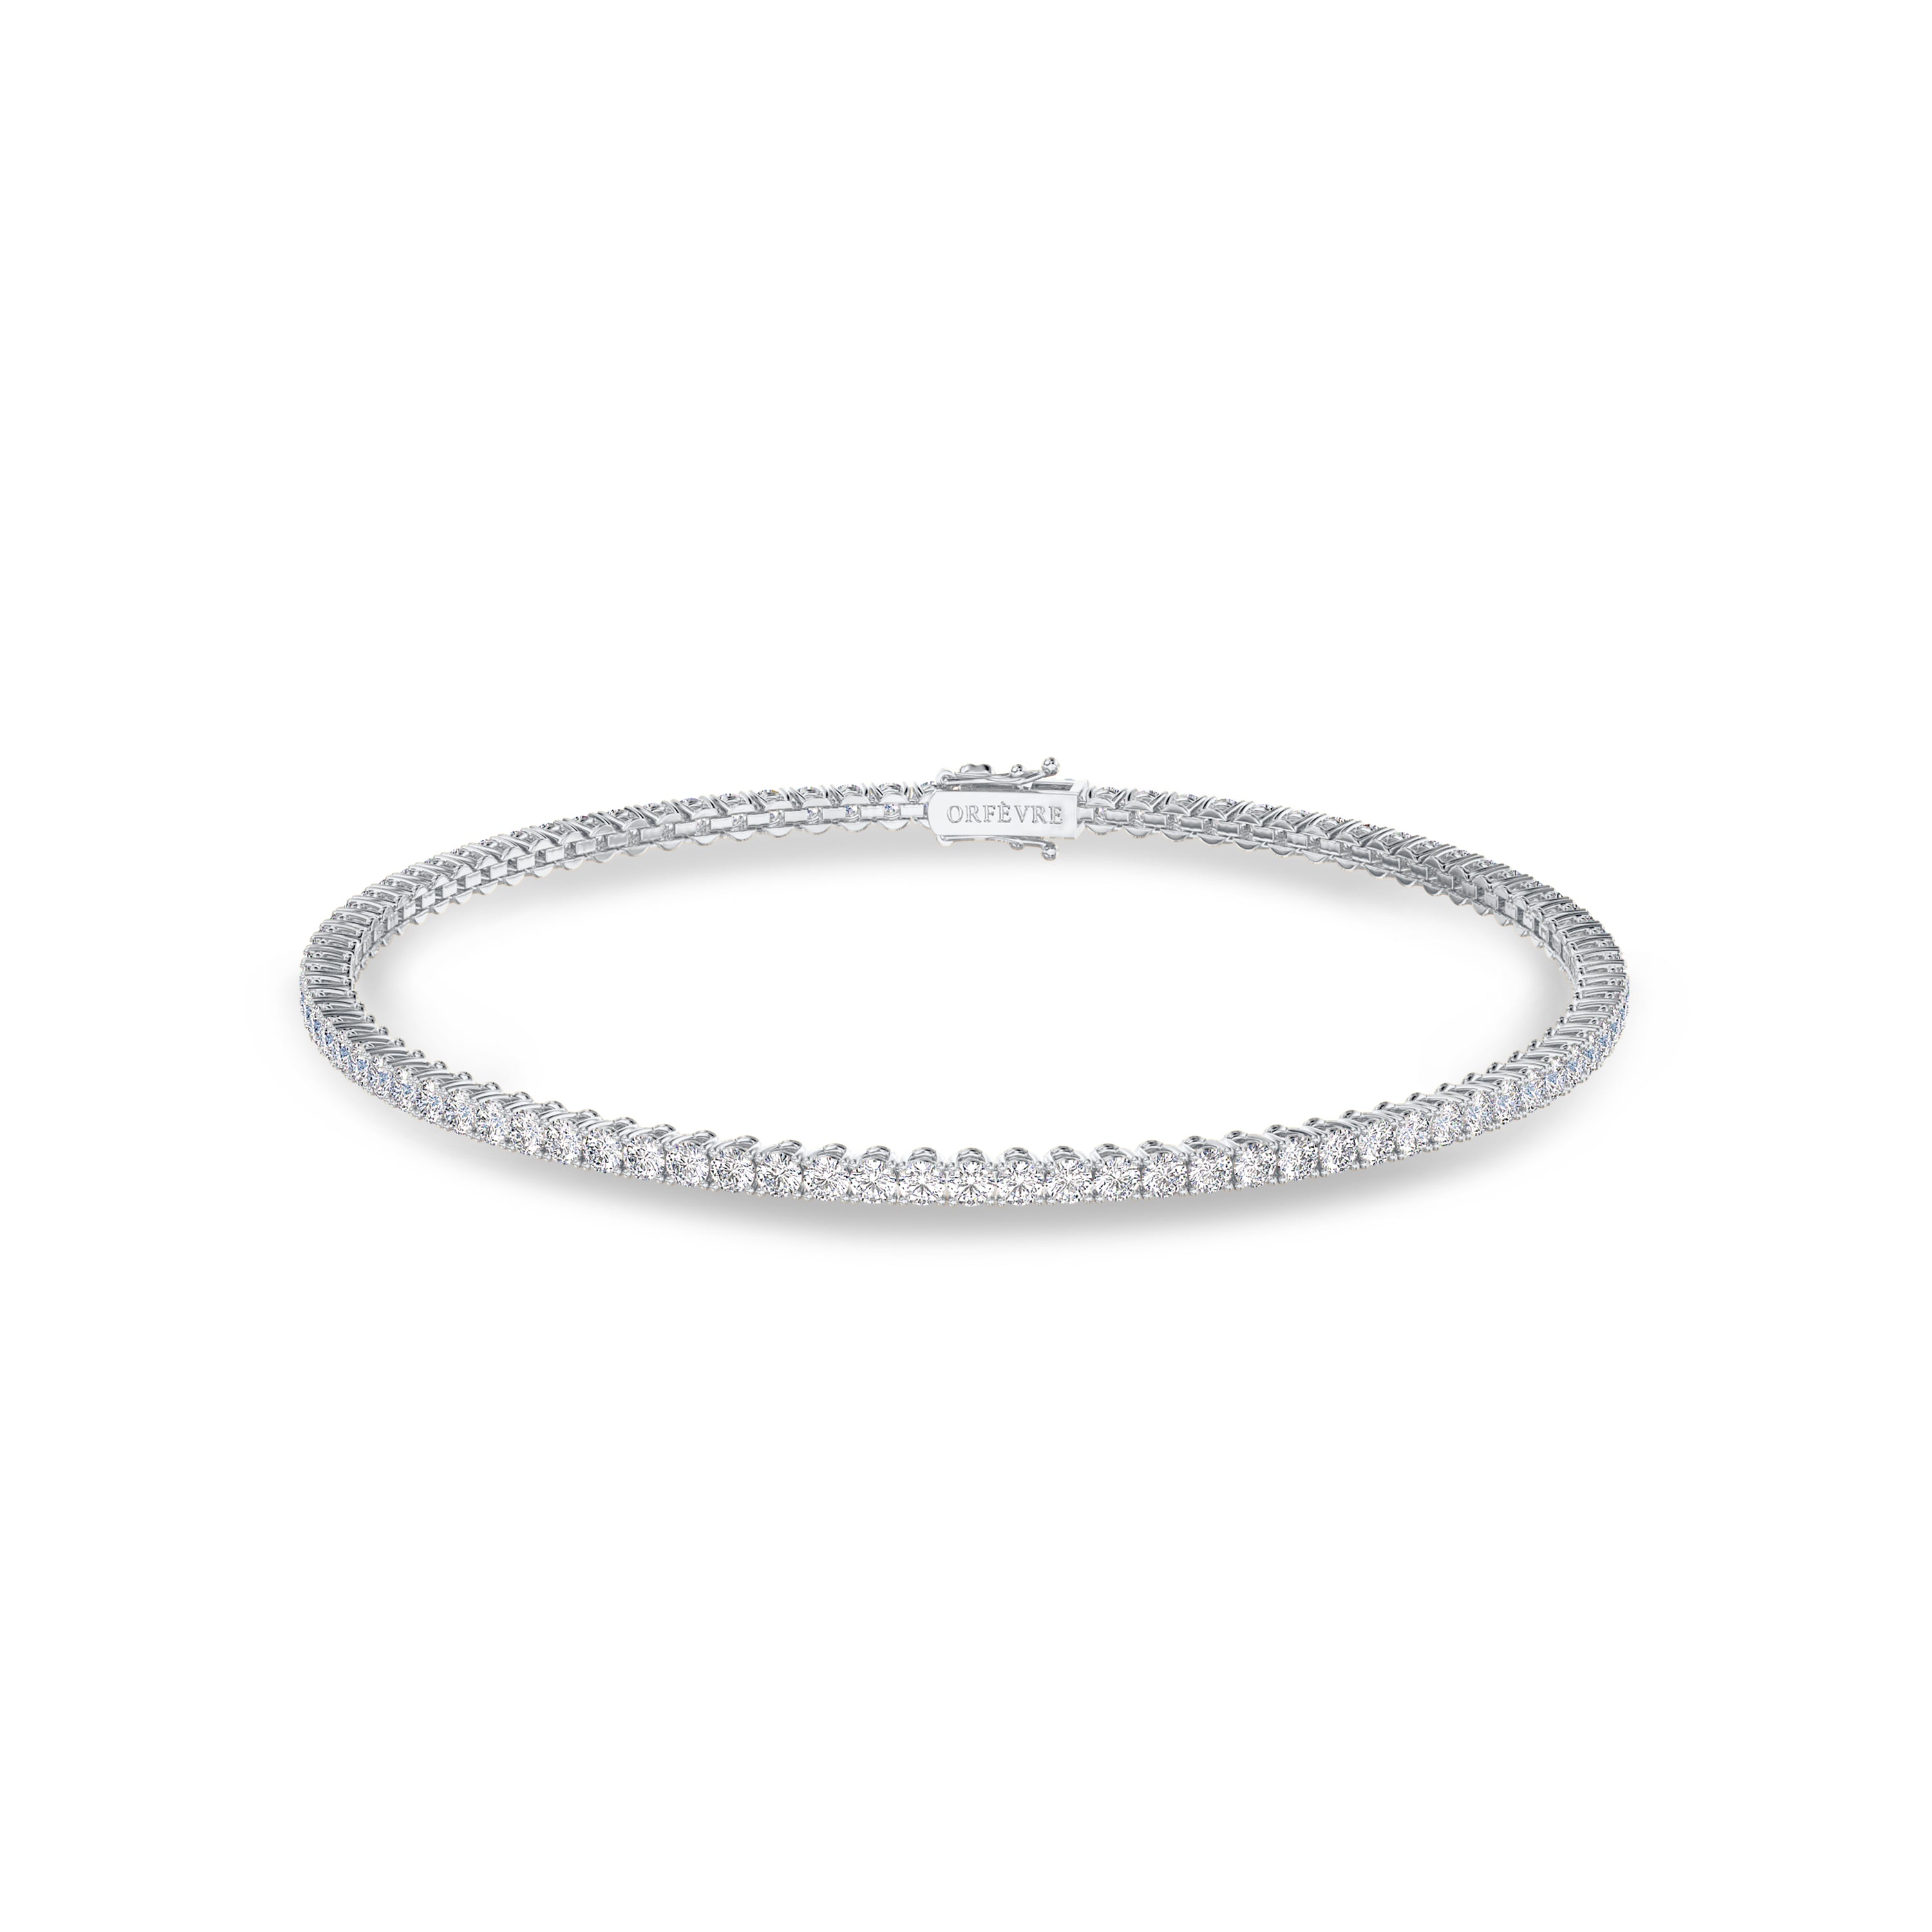 1.80 Carat white gold tennis bracelet in FG color and SI clarity